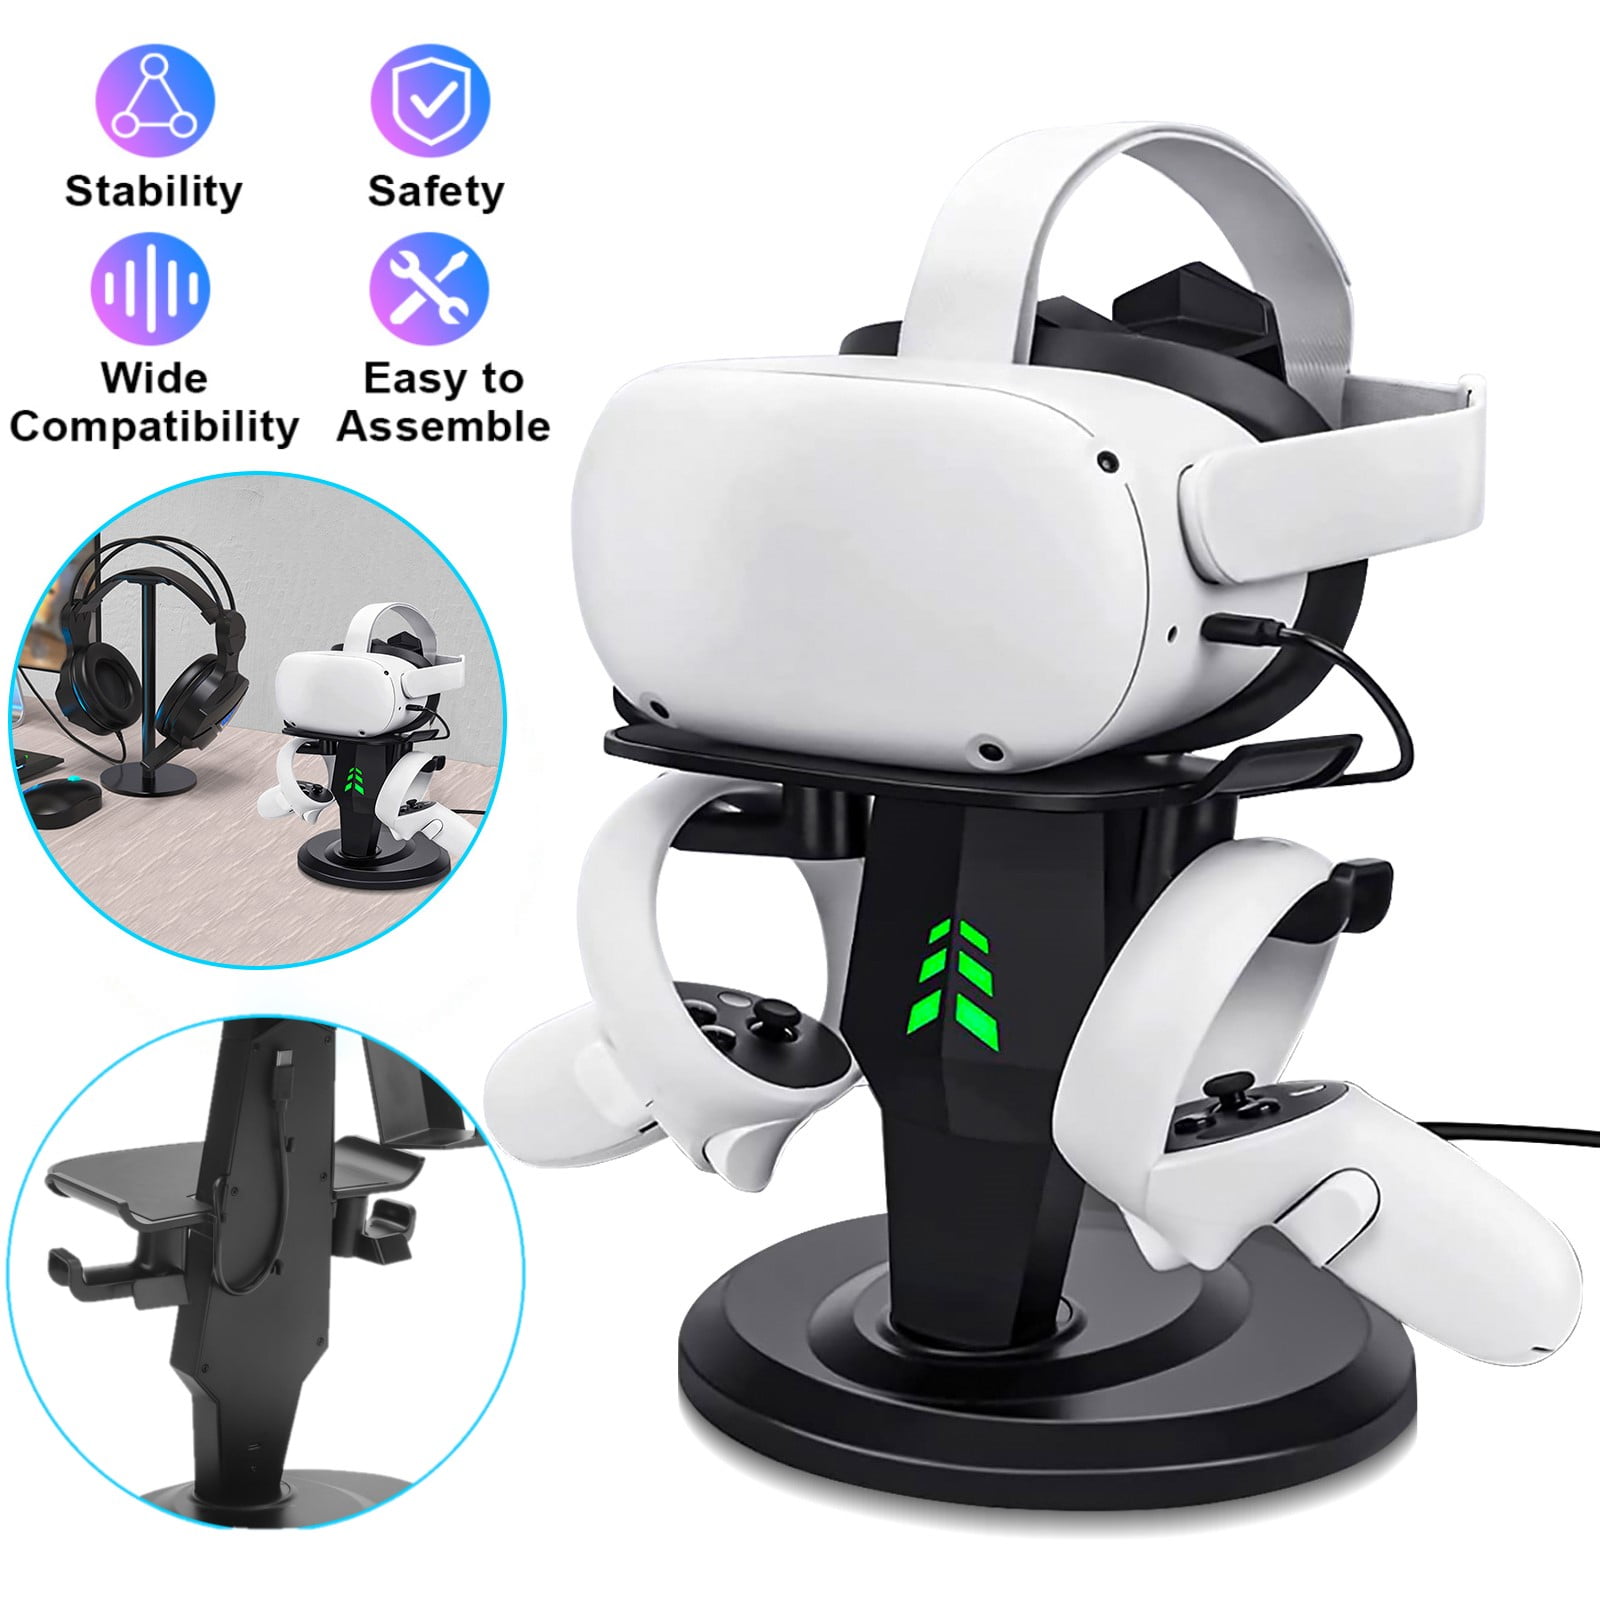 VR Stand, EEEkit Display Stand Charging Dock, VR Display Stand Accessories Fit for Quest 2/Quest/Rift S VR Headset, Dual Controller Charger Holder Storage Base with LED Indicator - Walmart.com